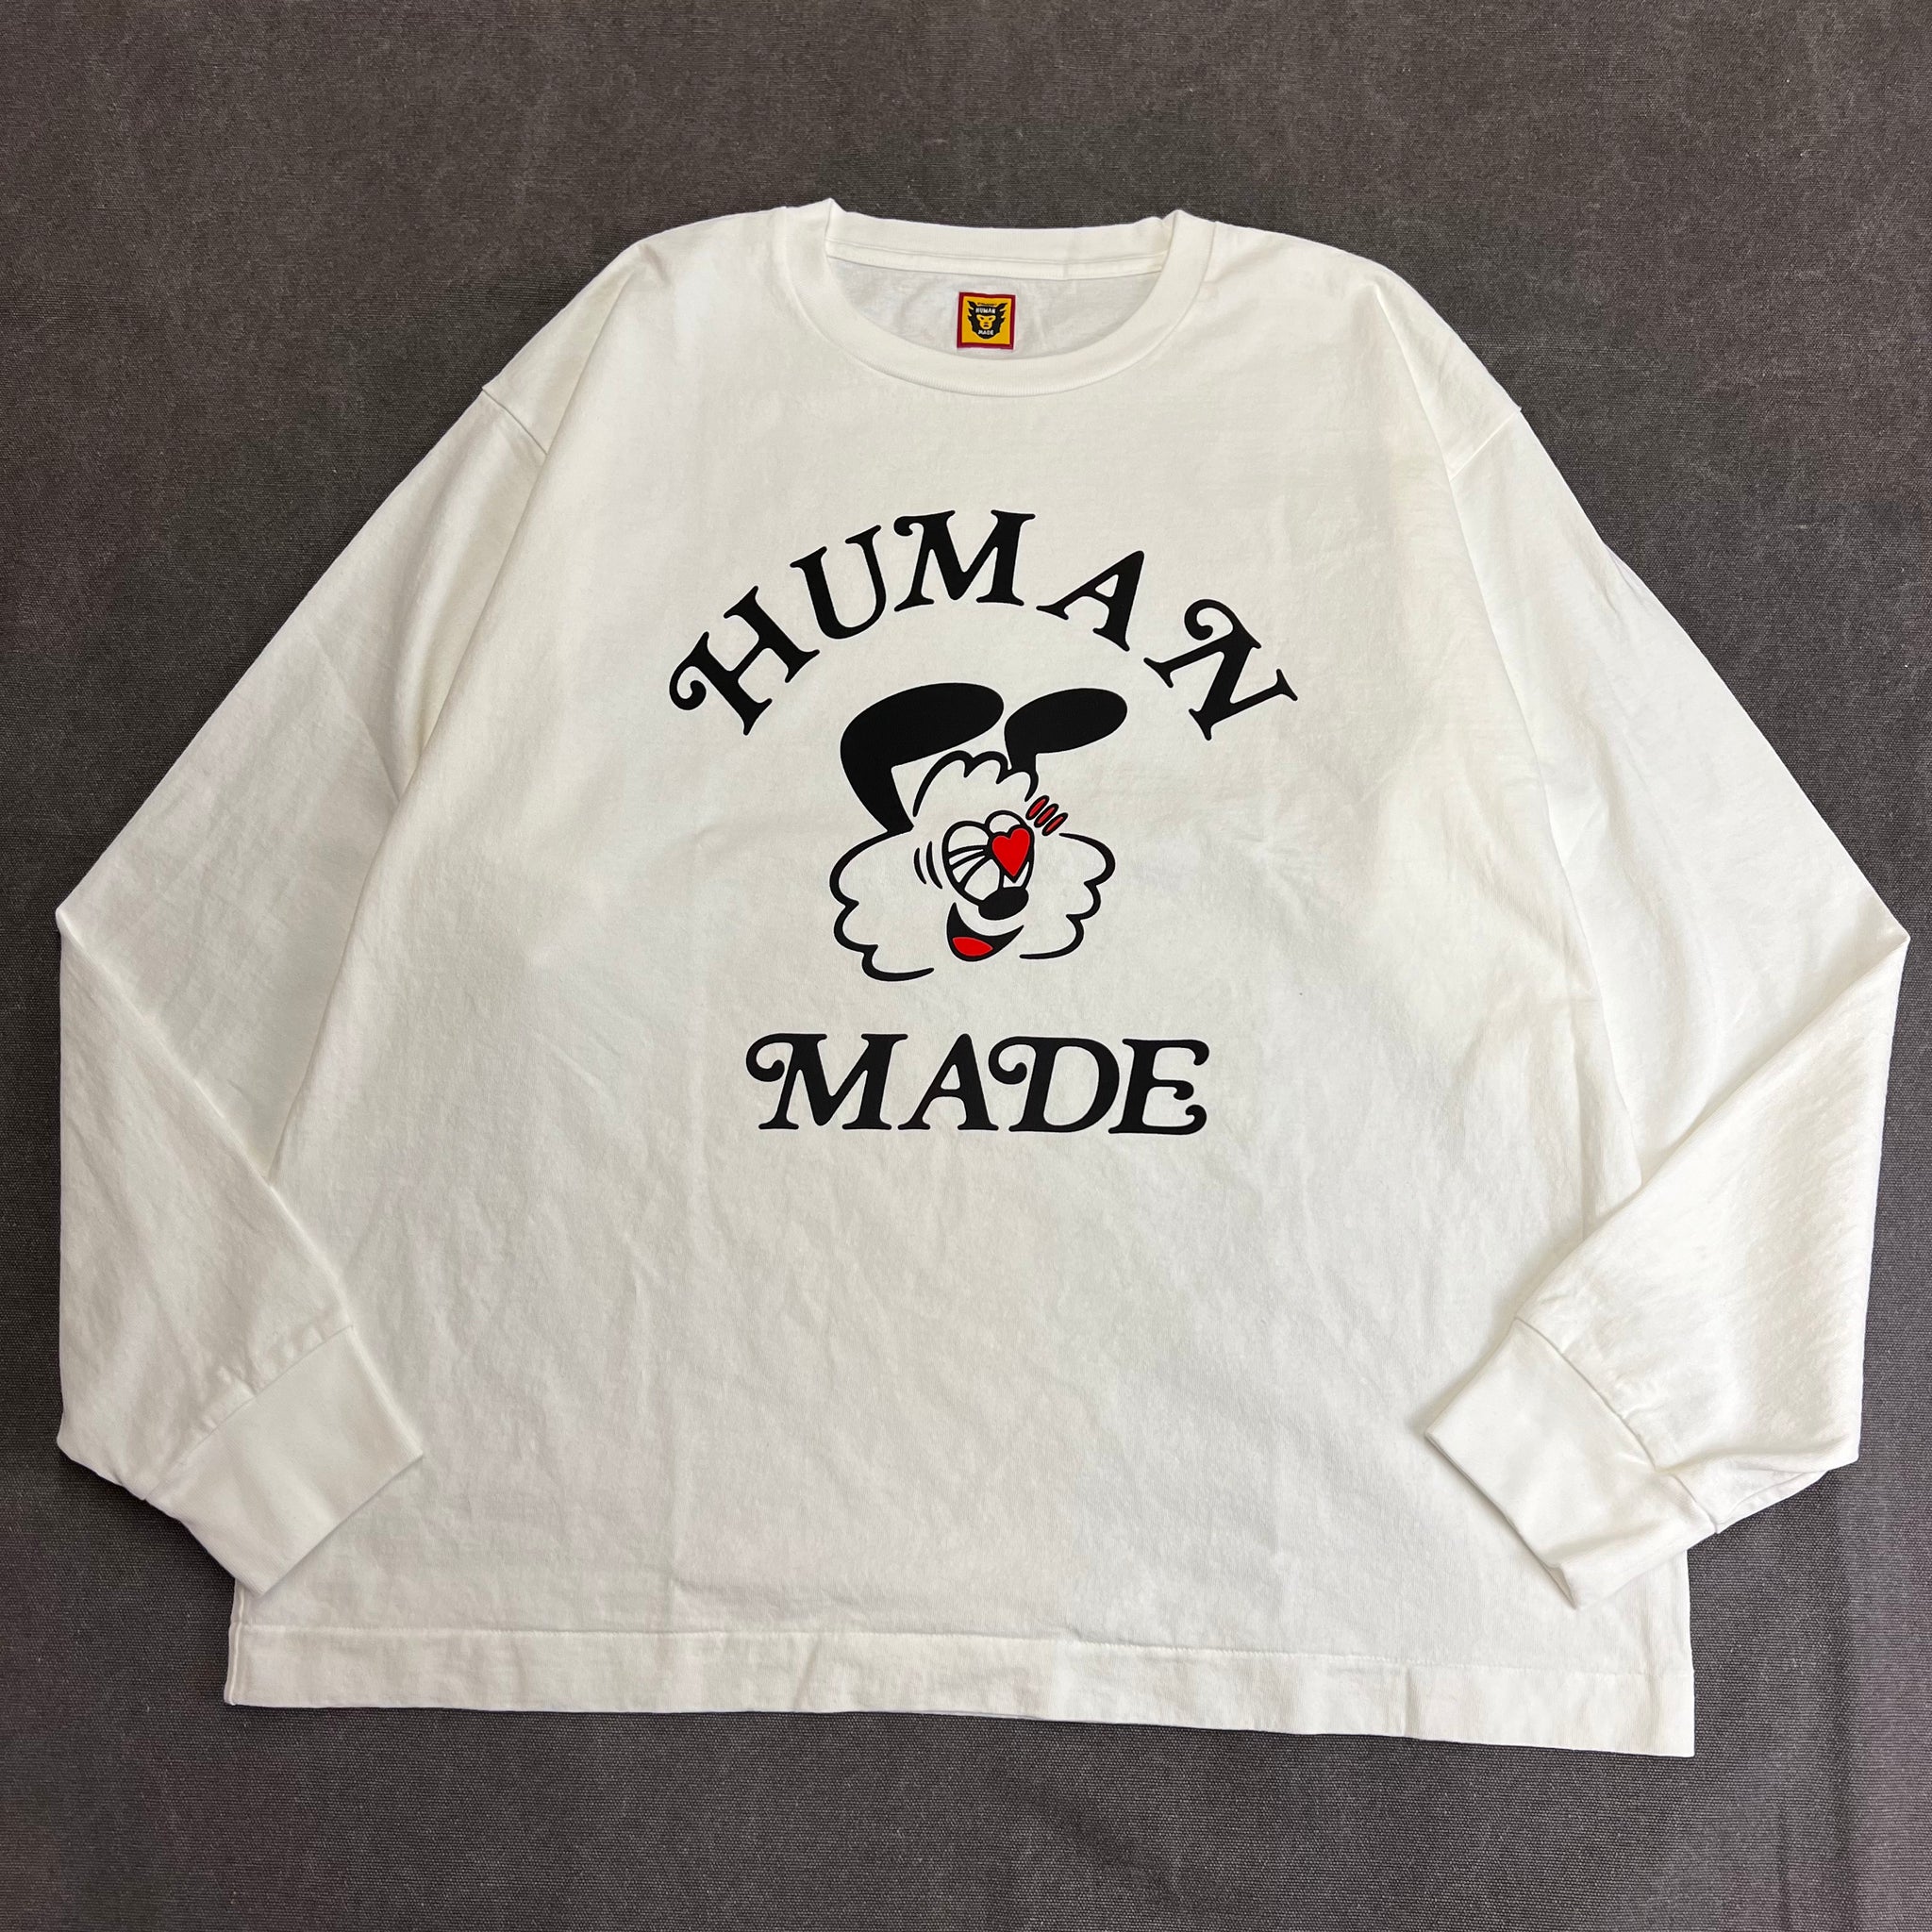 HUMAN MADE GDC WHITE DAY T-SHIRT S 2枚セット